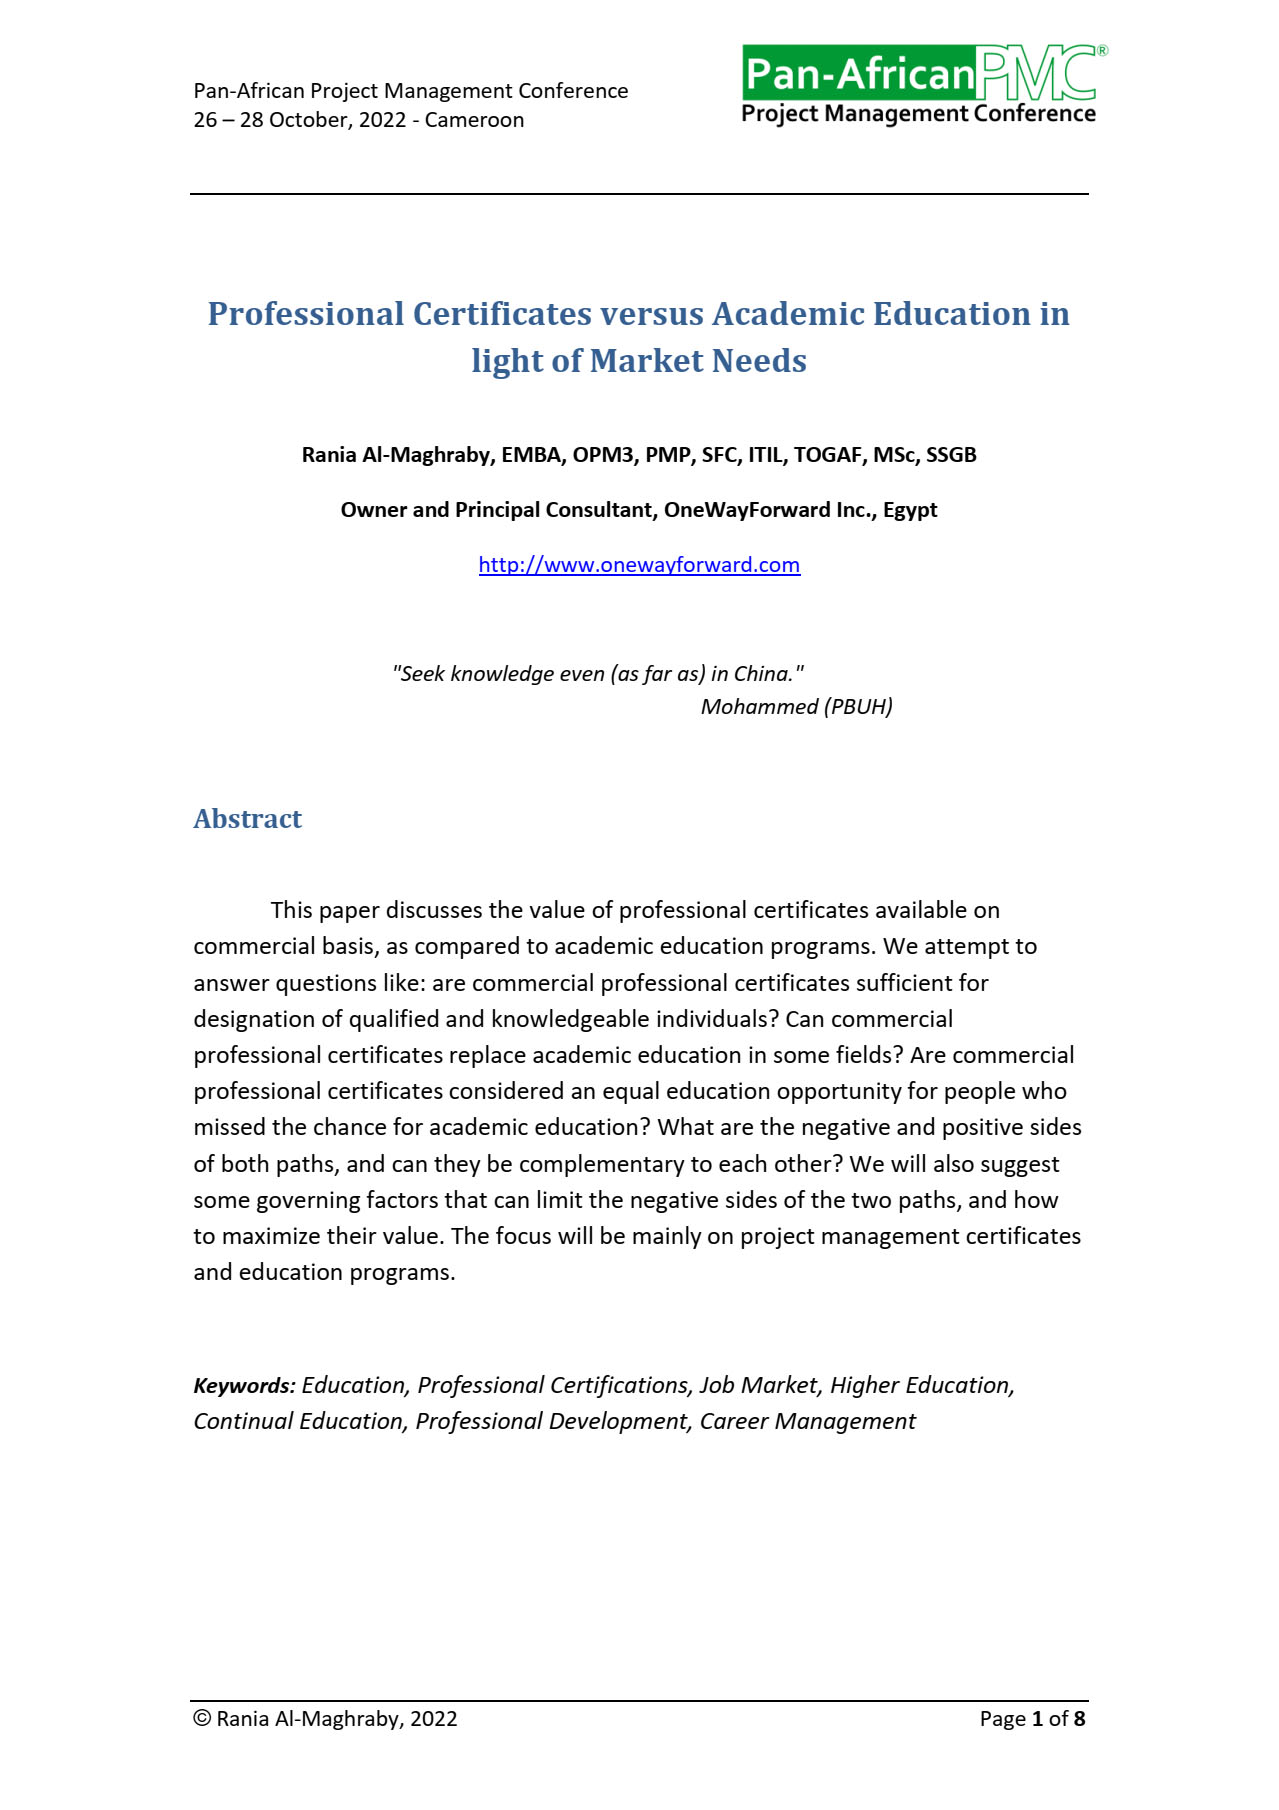 professional-certificates-versus-academic-education-in-light-of-market-needs-preview